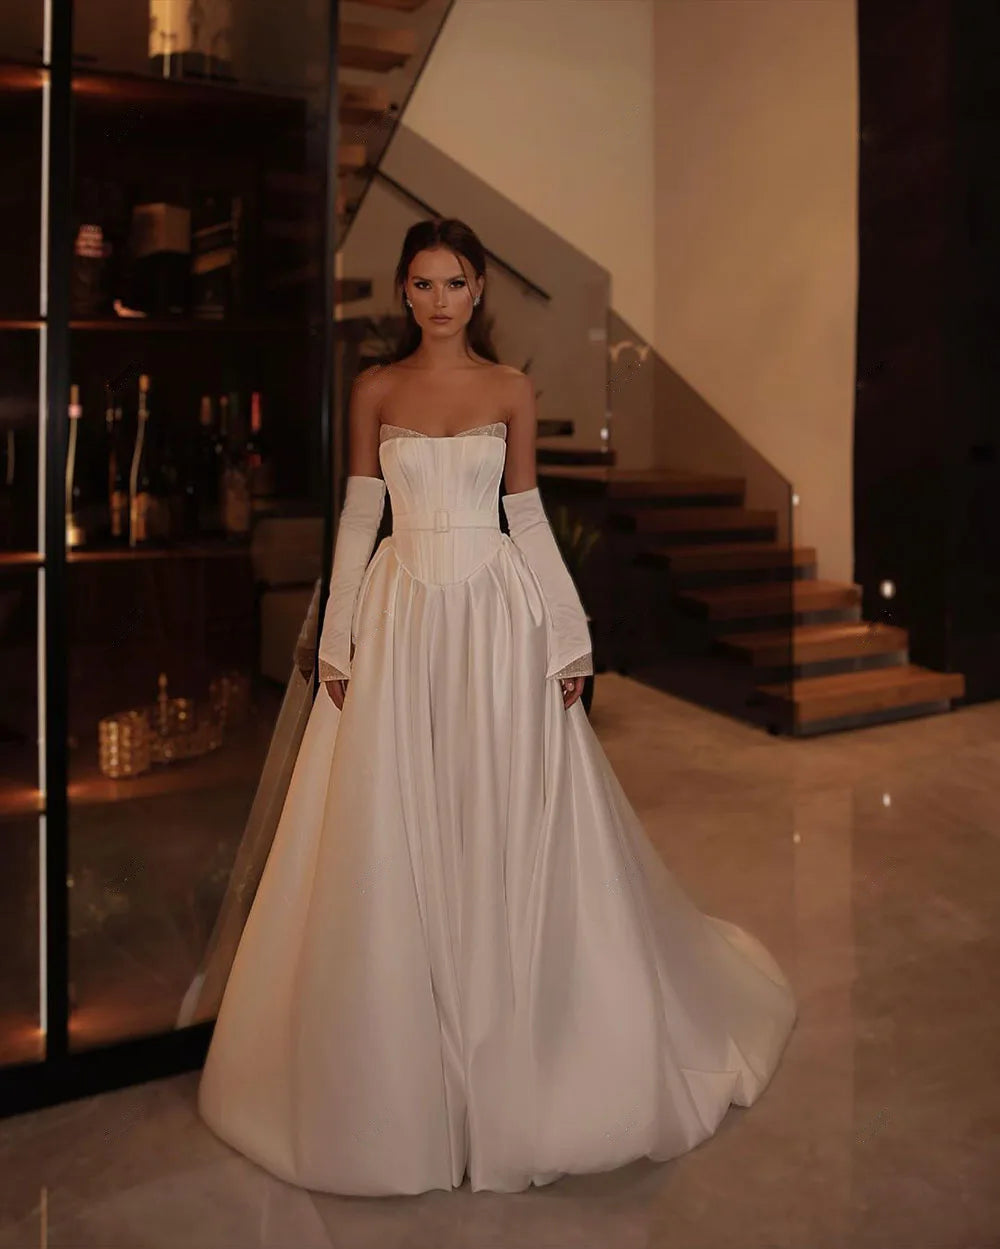 Elegant Simple Wedding Dresses Stain Sweetheart Boning Bride Gowns for Women A-Line Long Bridal Party Dress with Belt